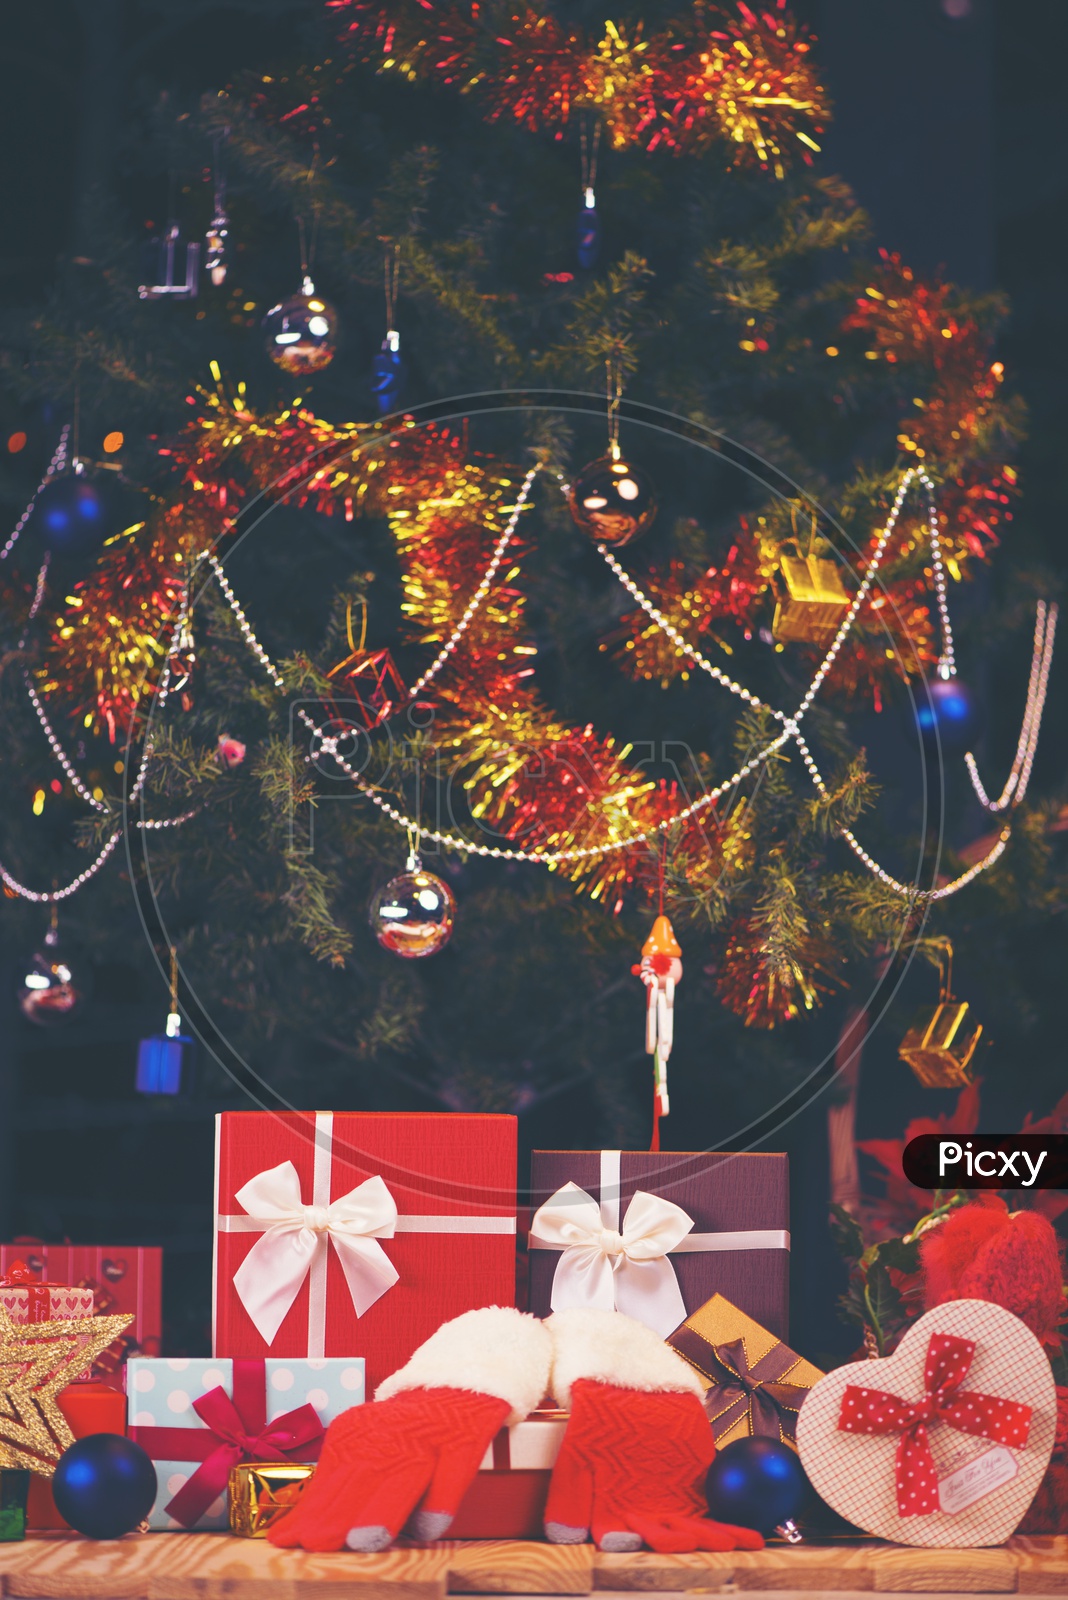 Christmas Festival Template Or Backgrounds With decorated Christmas Tree And Gifts